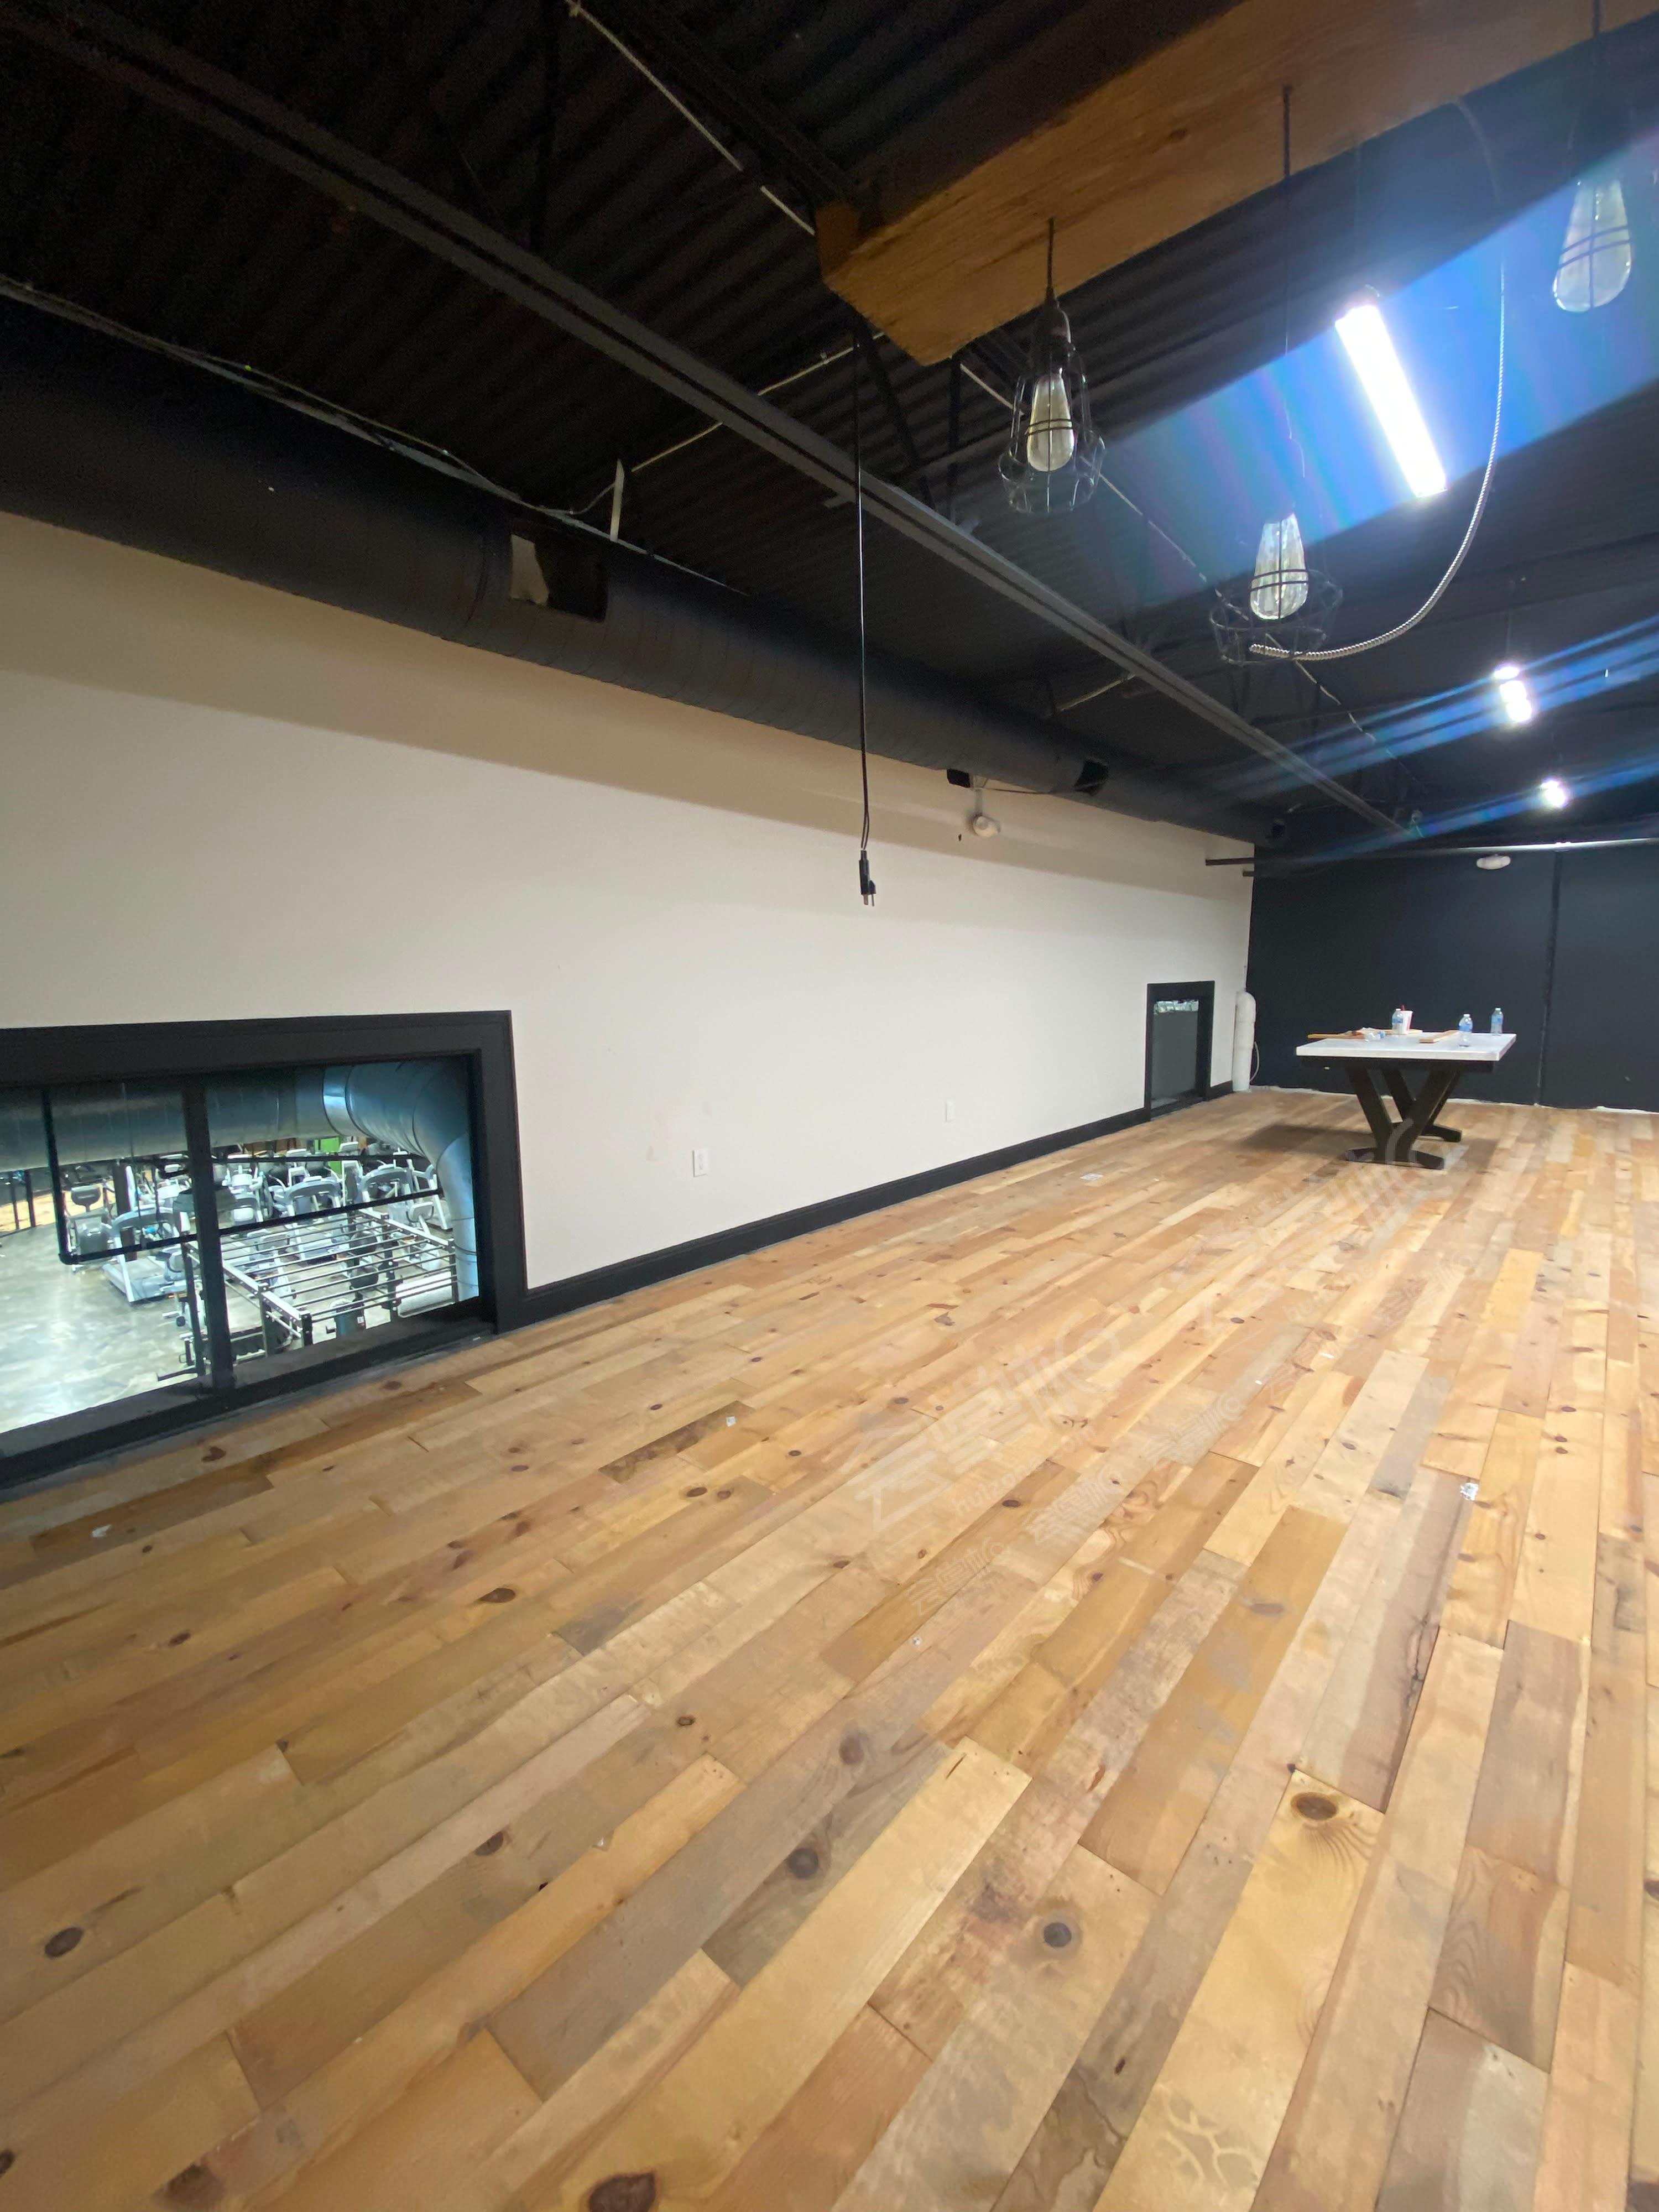 Modern/industrial studio space with wood flooring located near IAH Airport,  59N and FM1960